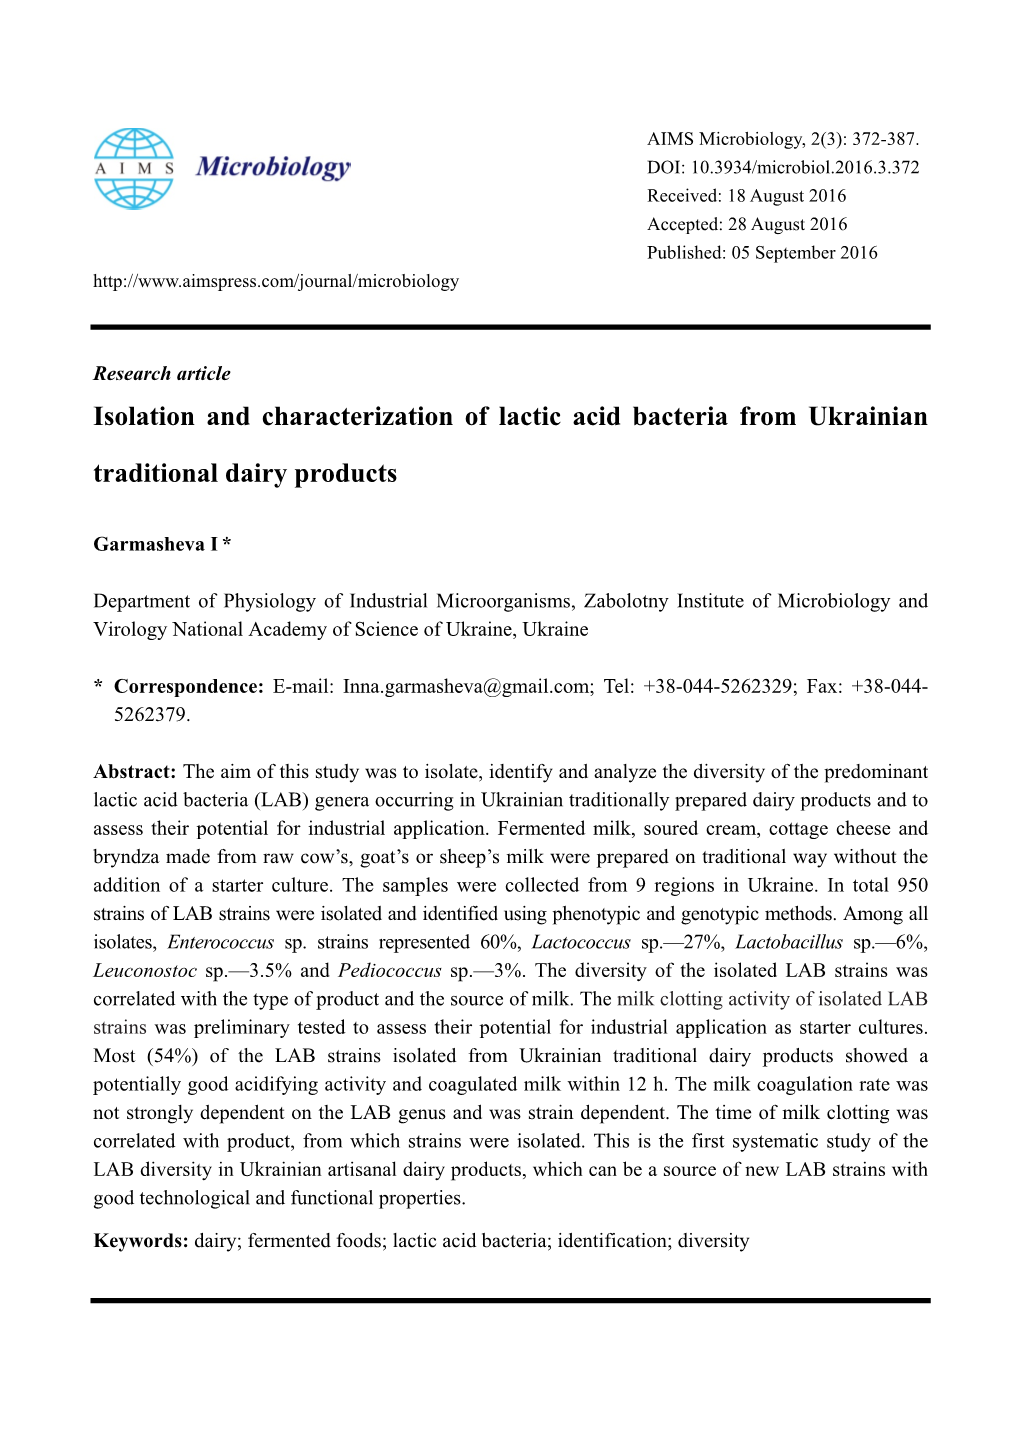 Isolation and Characterization of Lactic Acid Bacteria from Ukrainian Traditional Dairy Products